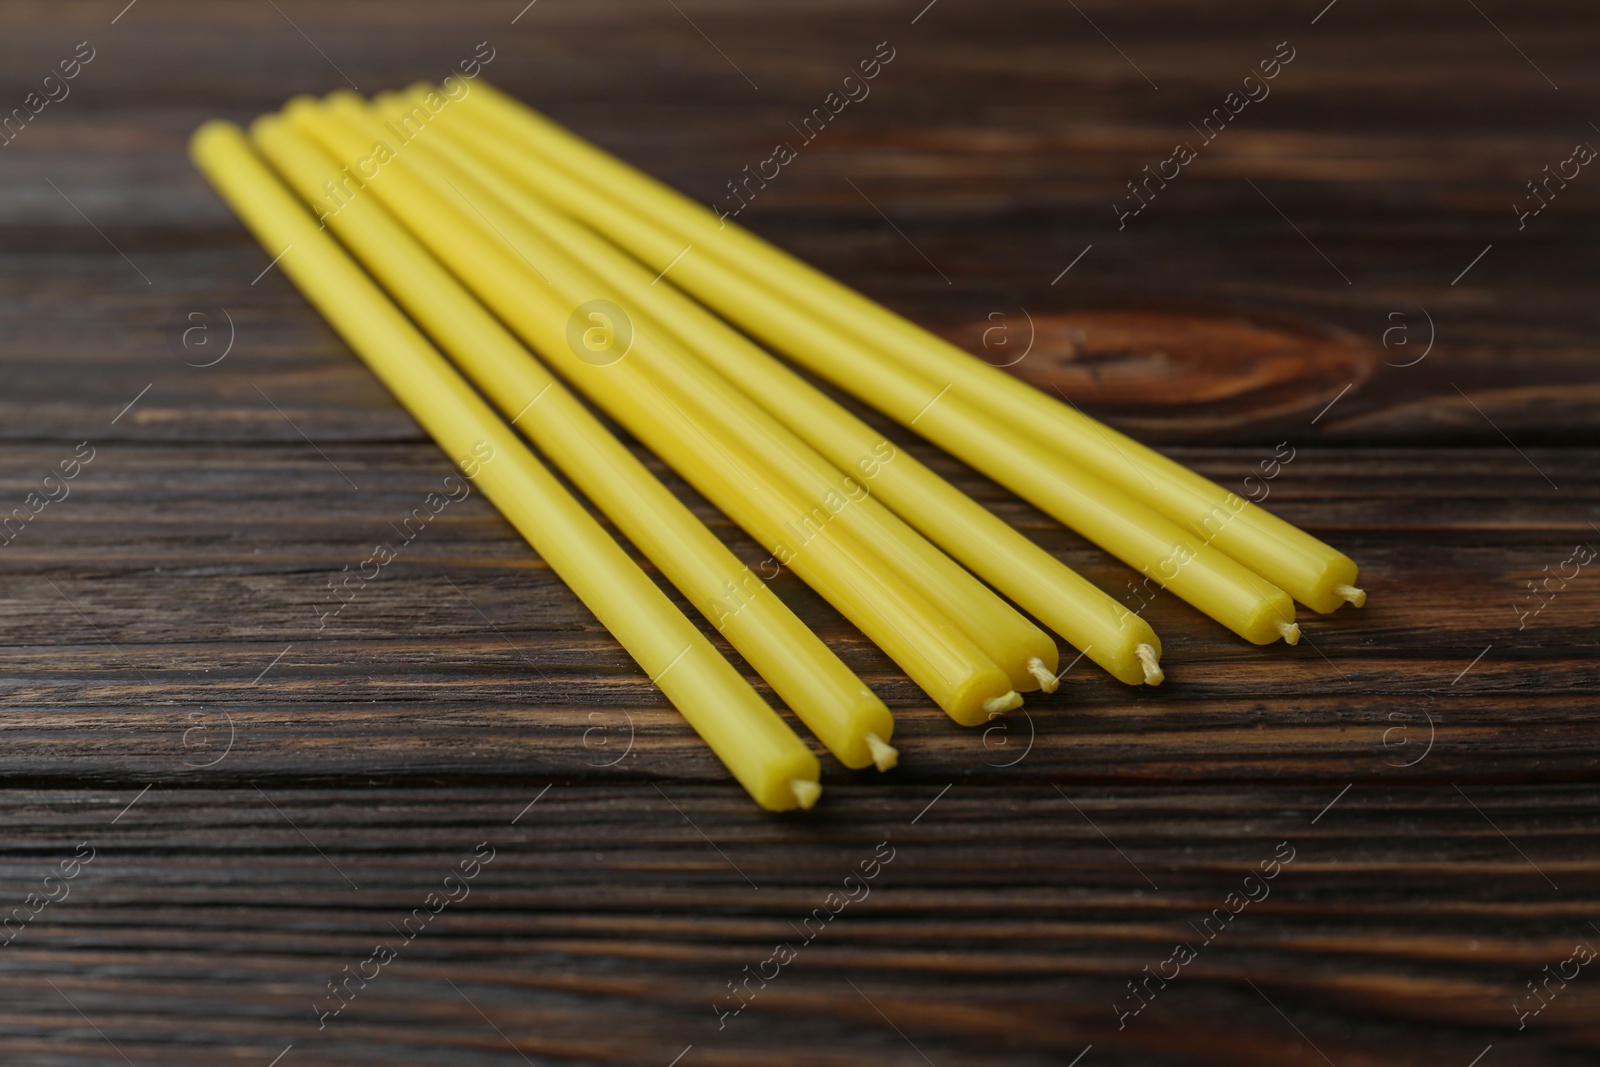 Photo of Many church candles on wooden table, closeup